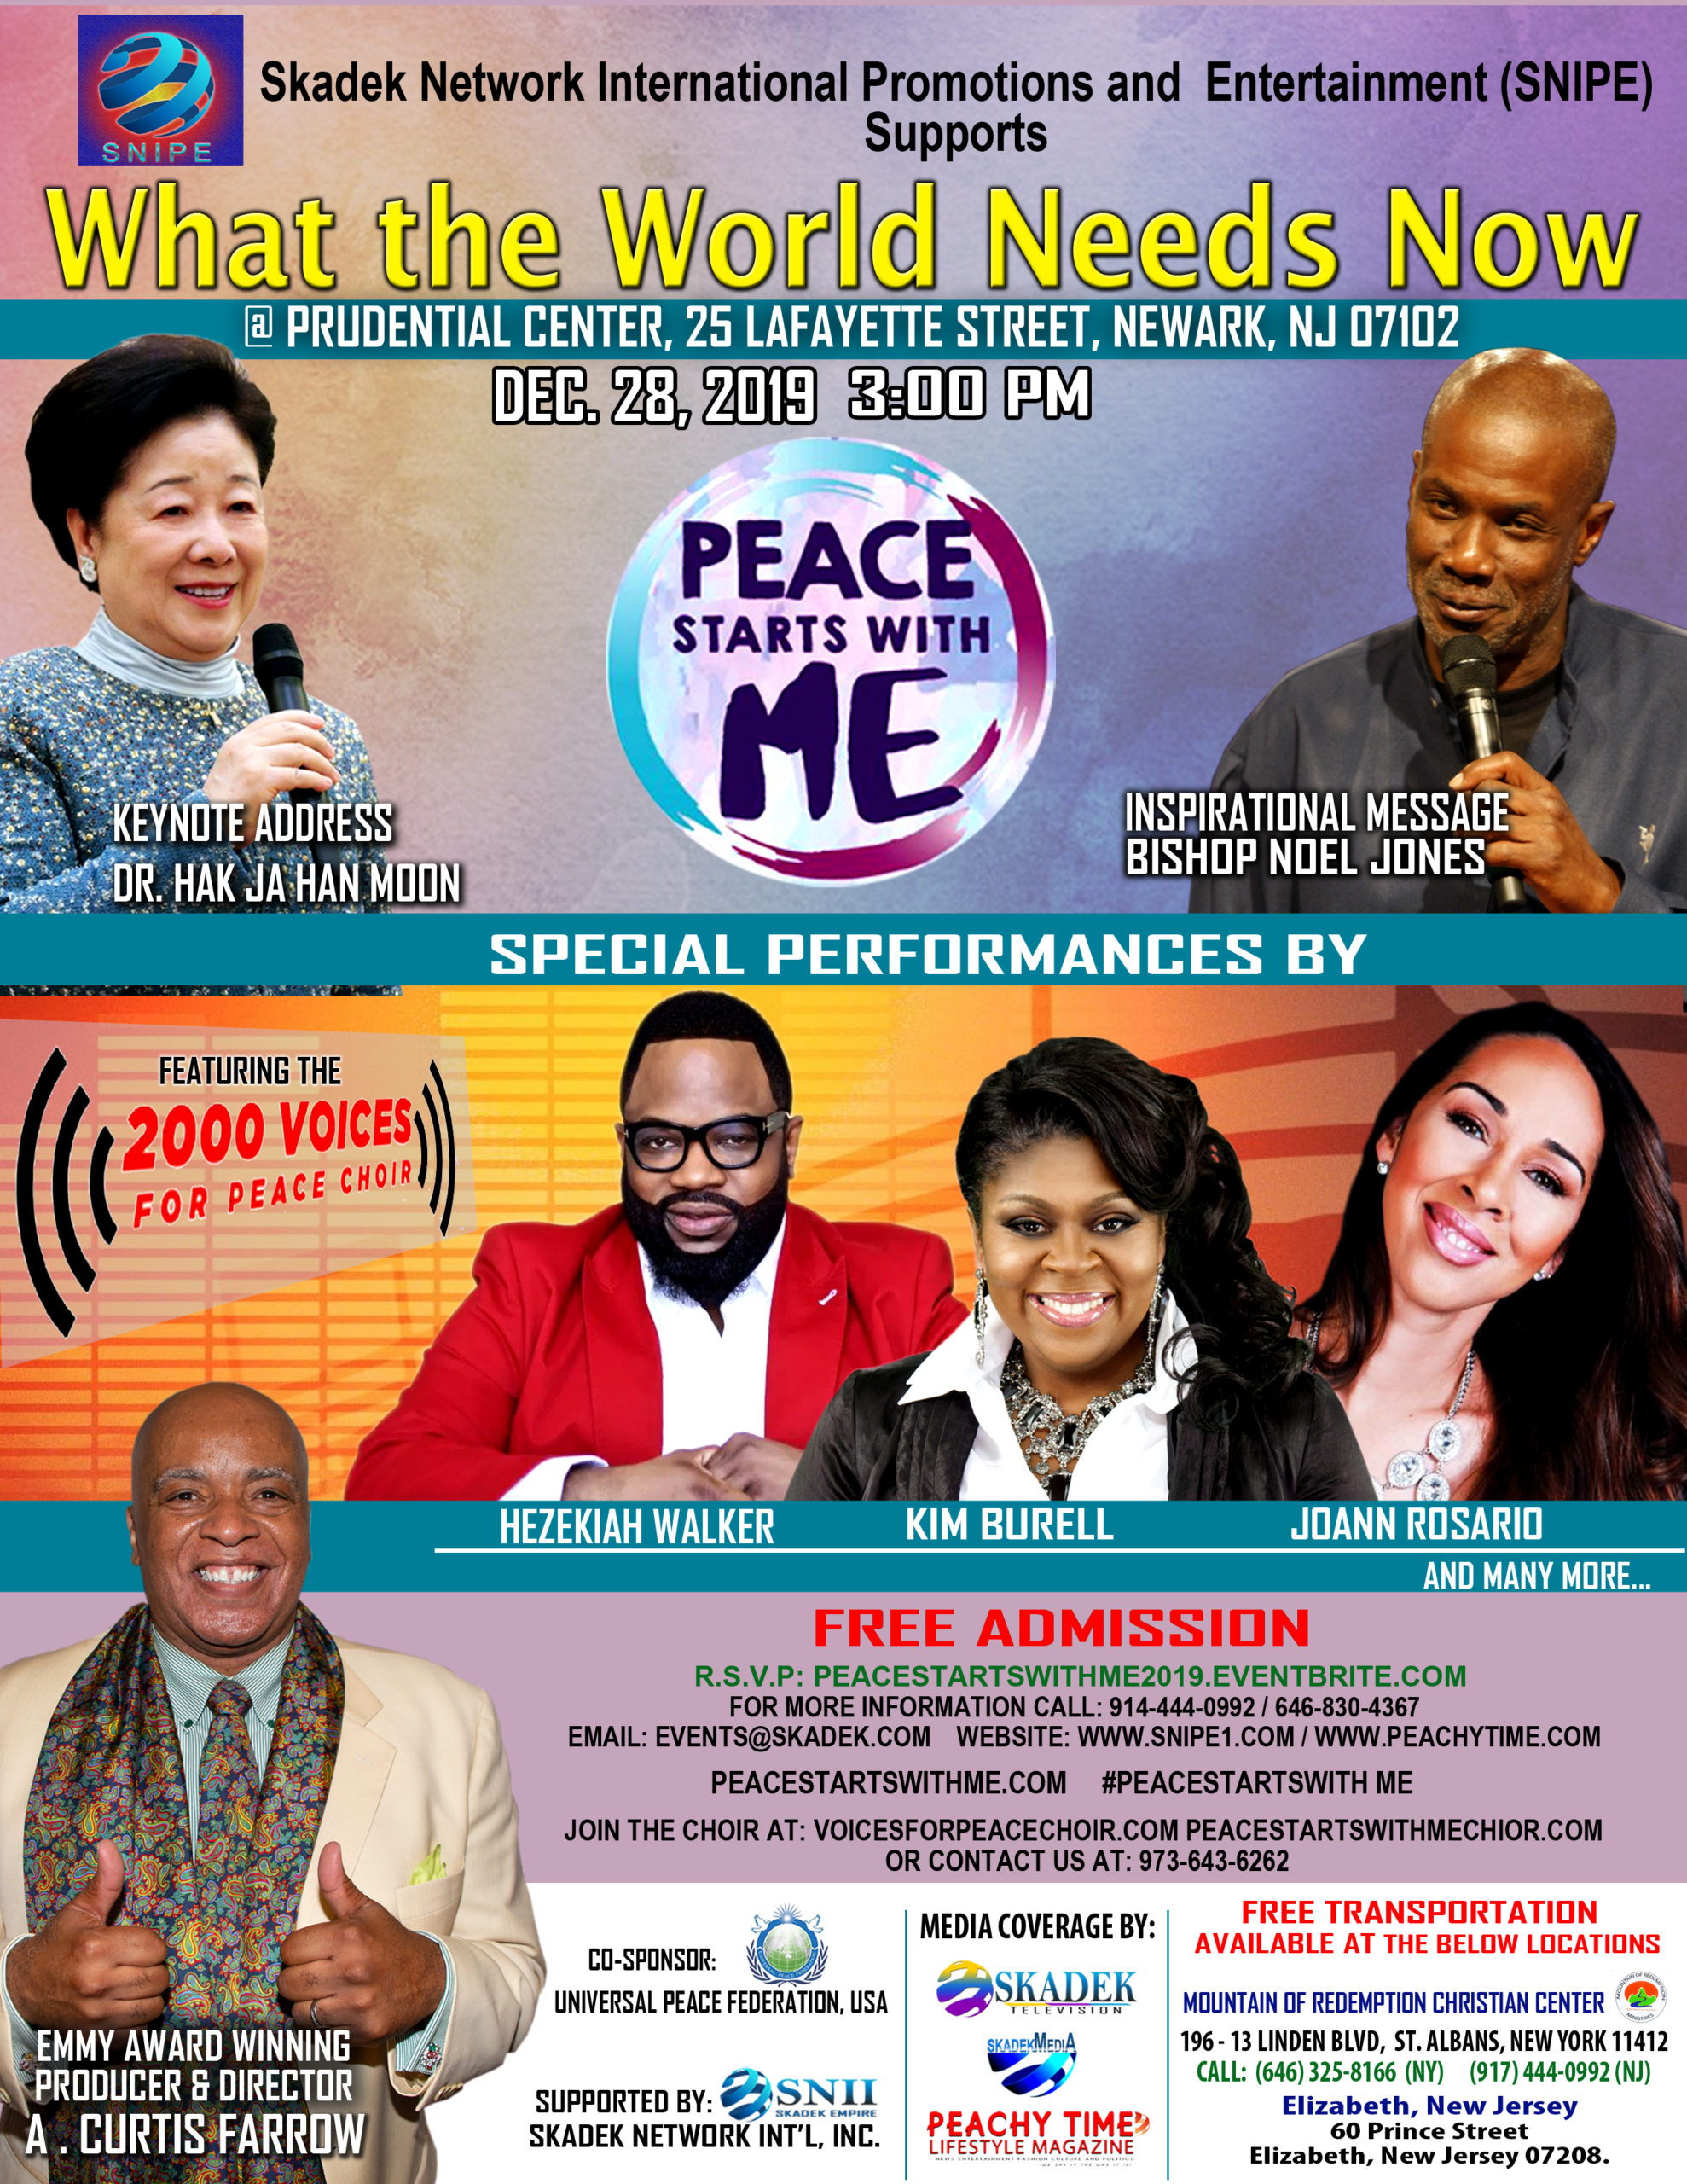 PEACE STARTS WITH ME CONCERT 2019 - UPDATED